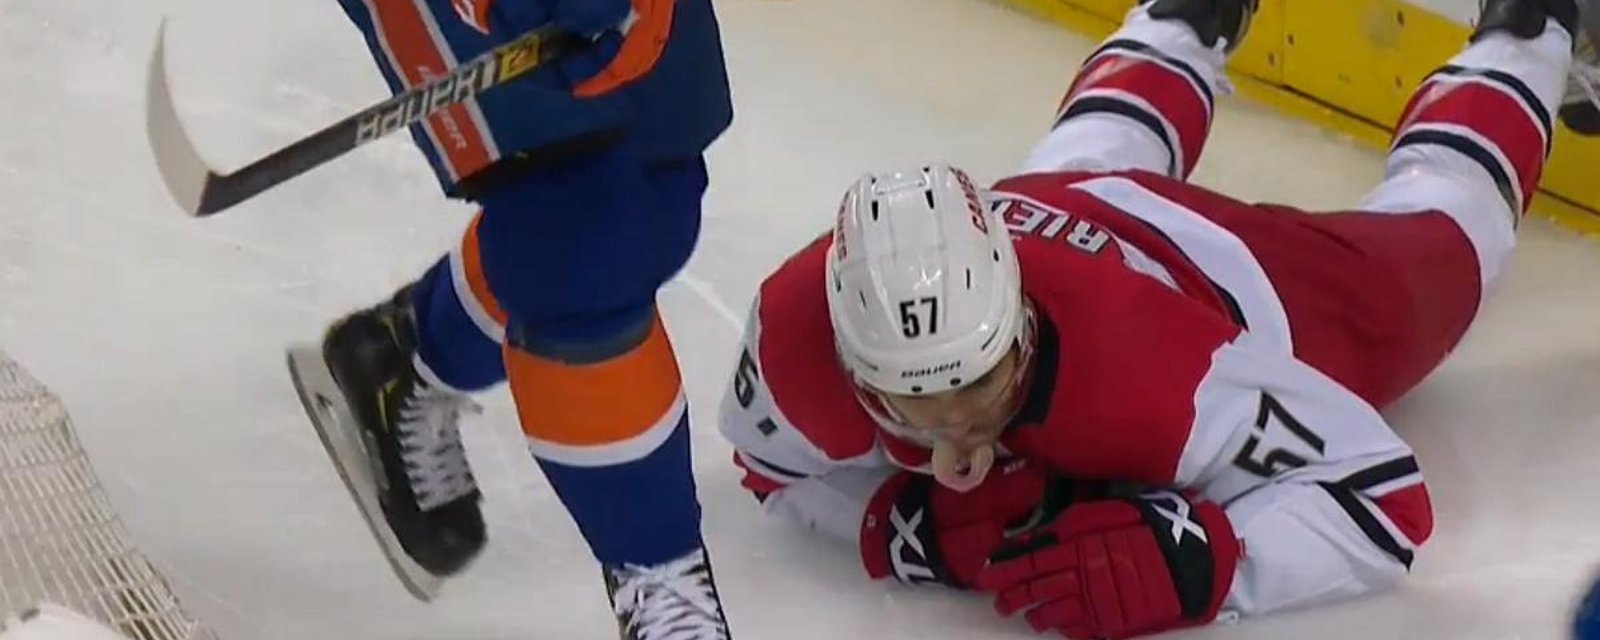 Hurricanes officially confirm season ending injury after round 2 of the Stanley Cup Playoffs.